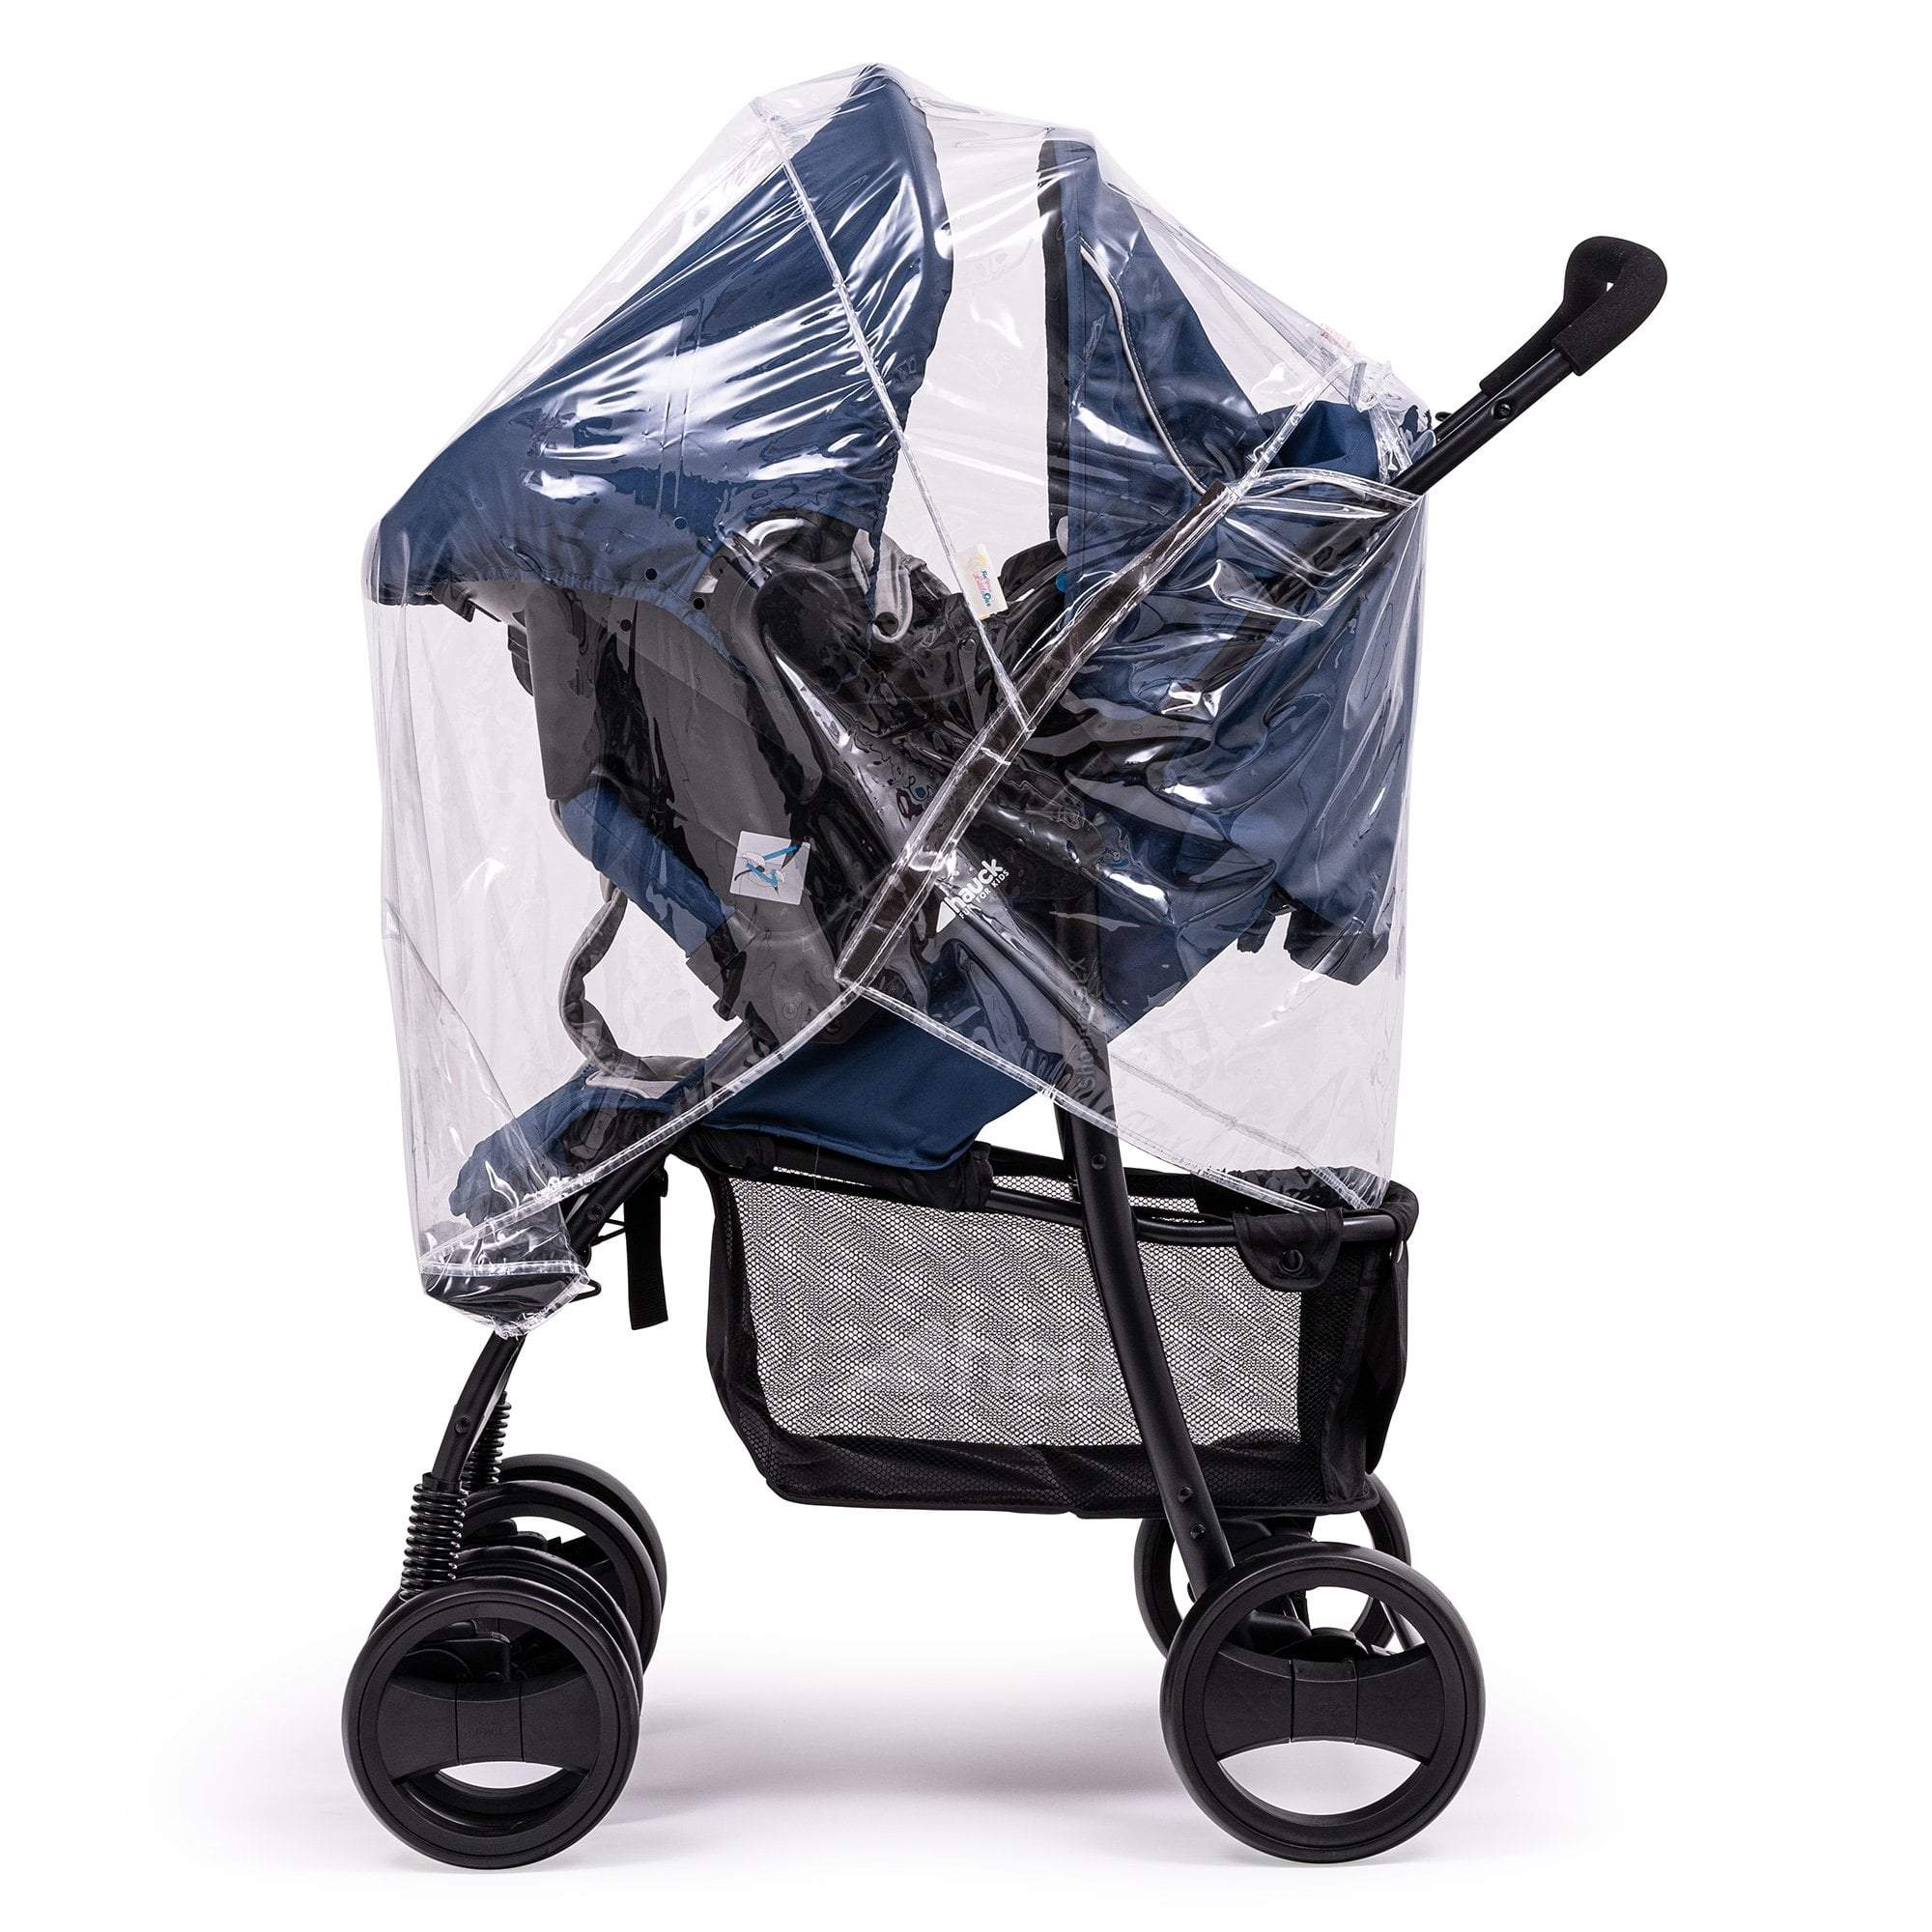 Travel System Raincover Compatible with Zeta - Fits All Models - For Your Little One